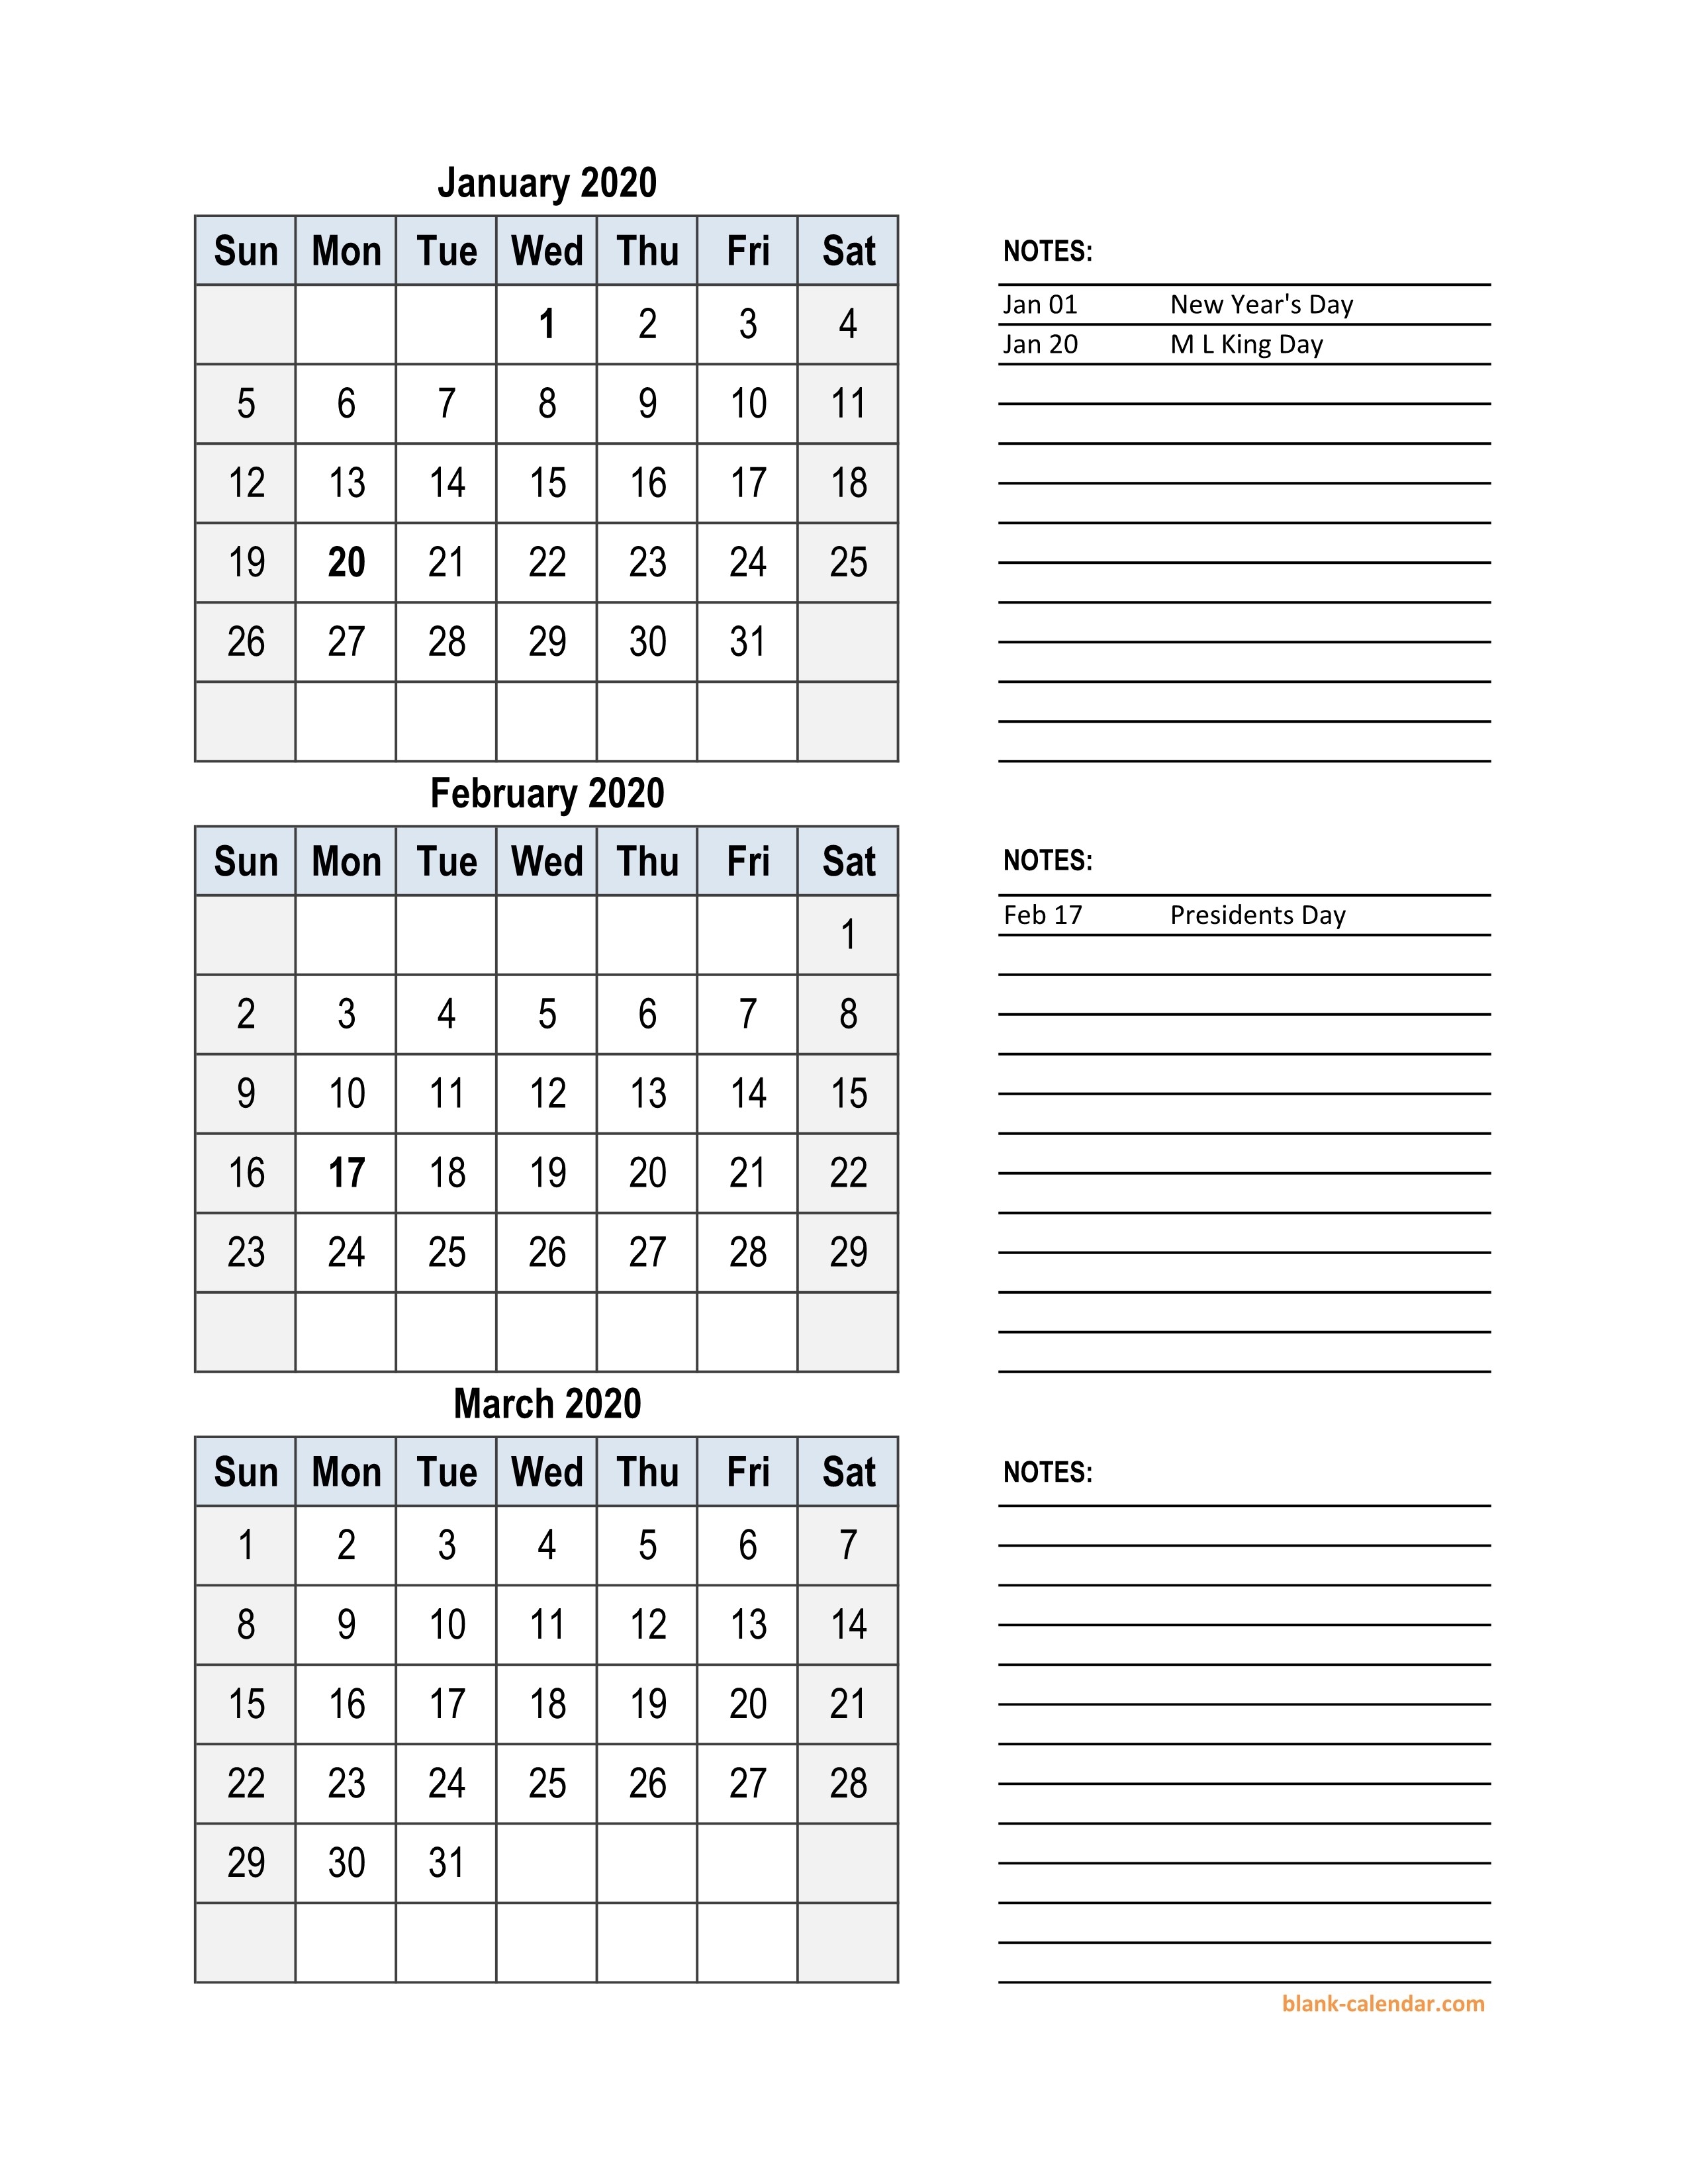 Free Download 2020 Excel Calendar, 3 Months In One Excel-Template Monthly Calendar 2020.xls